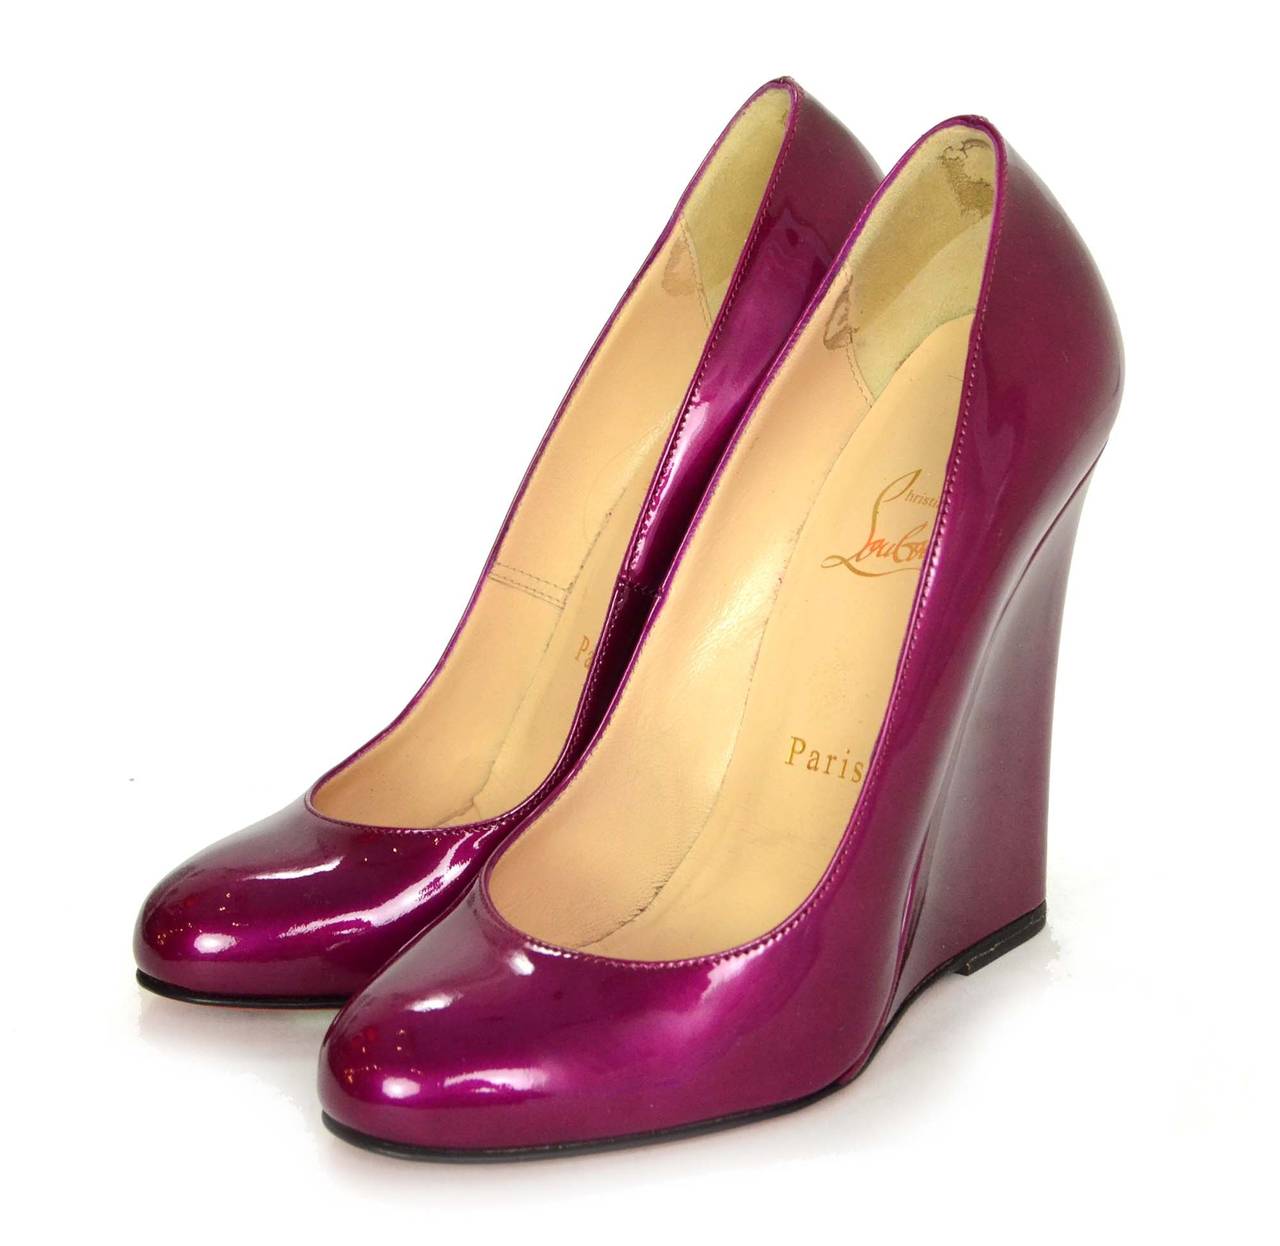 Christian Louboutin Iridescent Magenta Patent Wedges
Made in: Italy
Color: Magenta
Composition: Patent leather
Sole Stamp: Christian Louboutin Made in Italy 36 1/2
Closure/opening: Slide on
Current Retail: $660 + tax
Overall Condition: